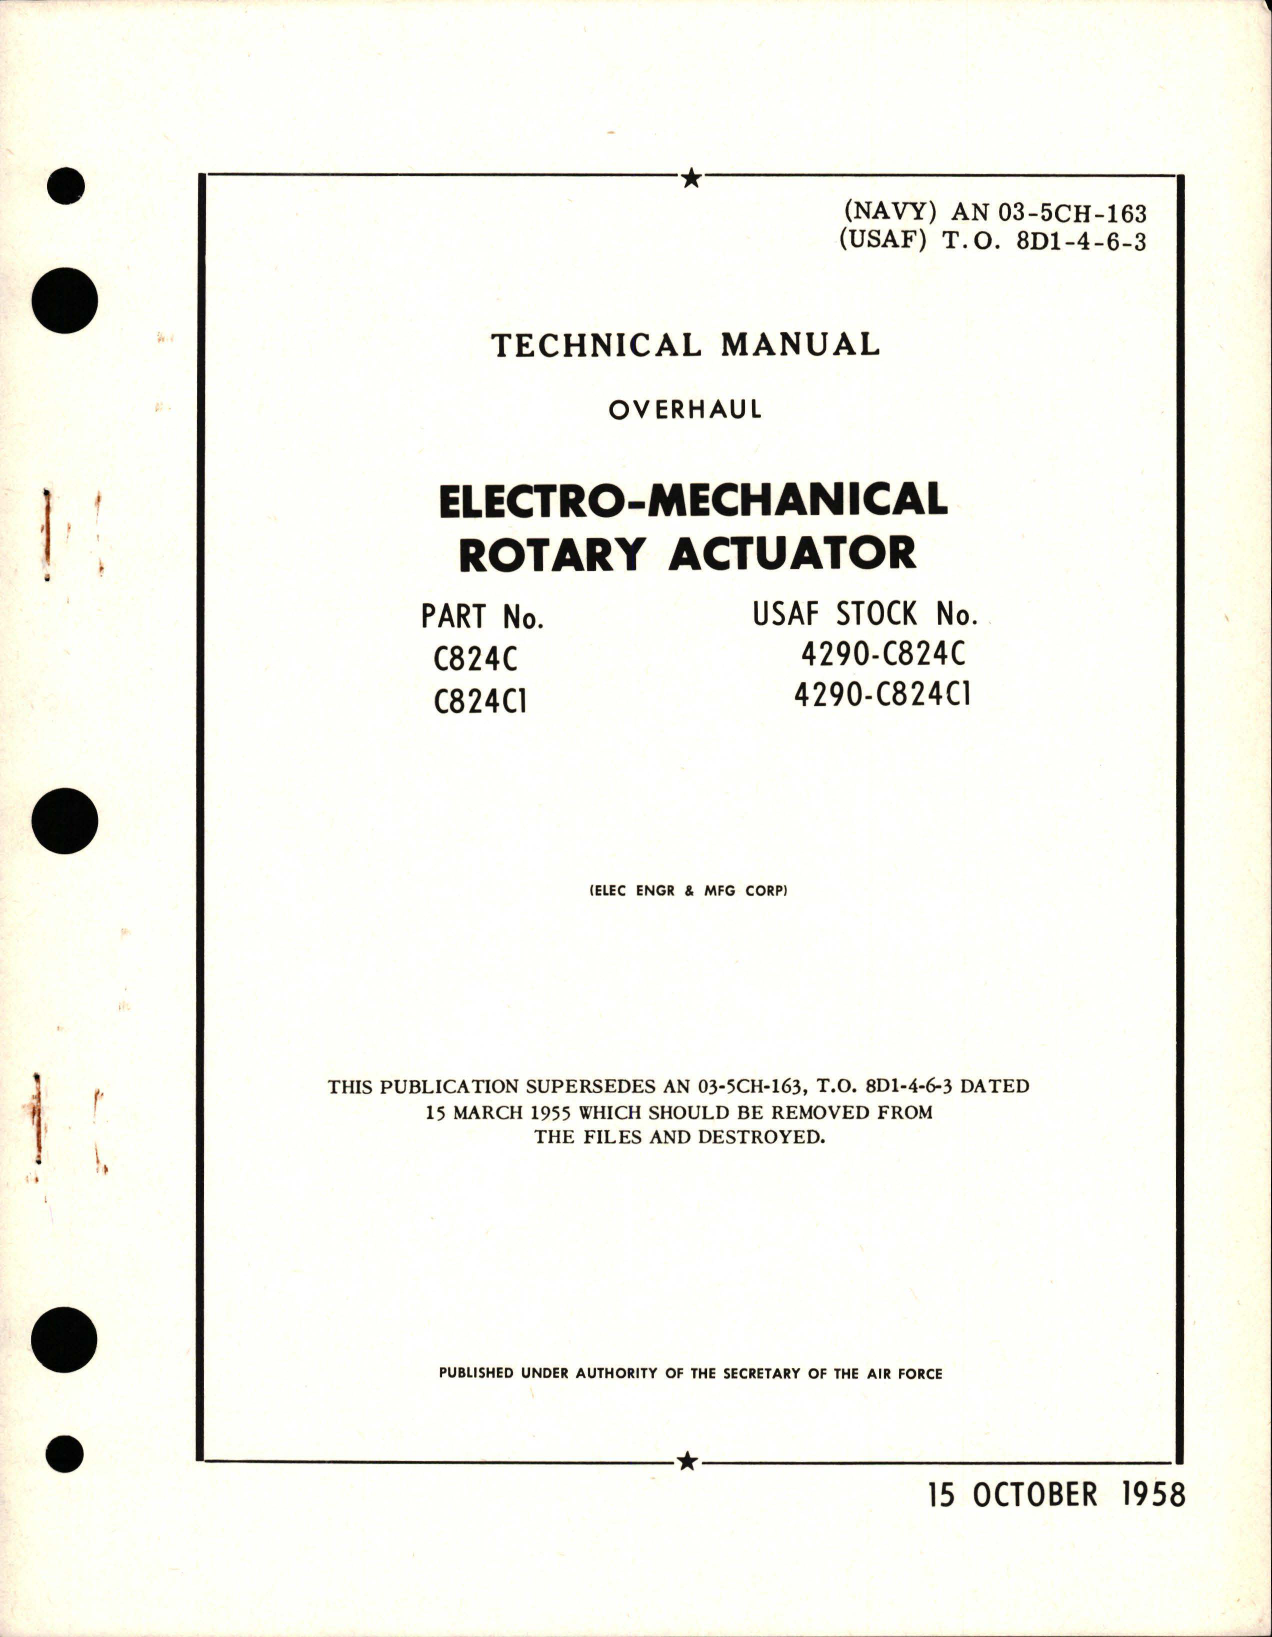 Sample page 1 from AirCorps Library document: Overhaul for Electro-Mechanical Rotary Actuator - Parts C824C and C824C1